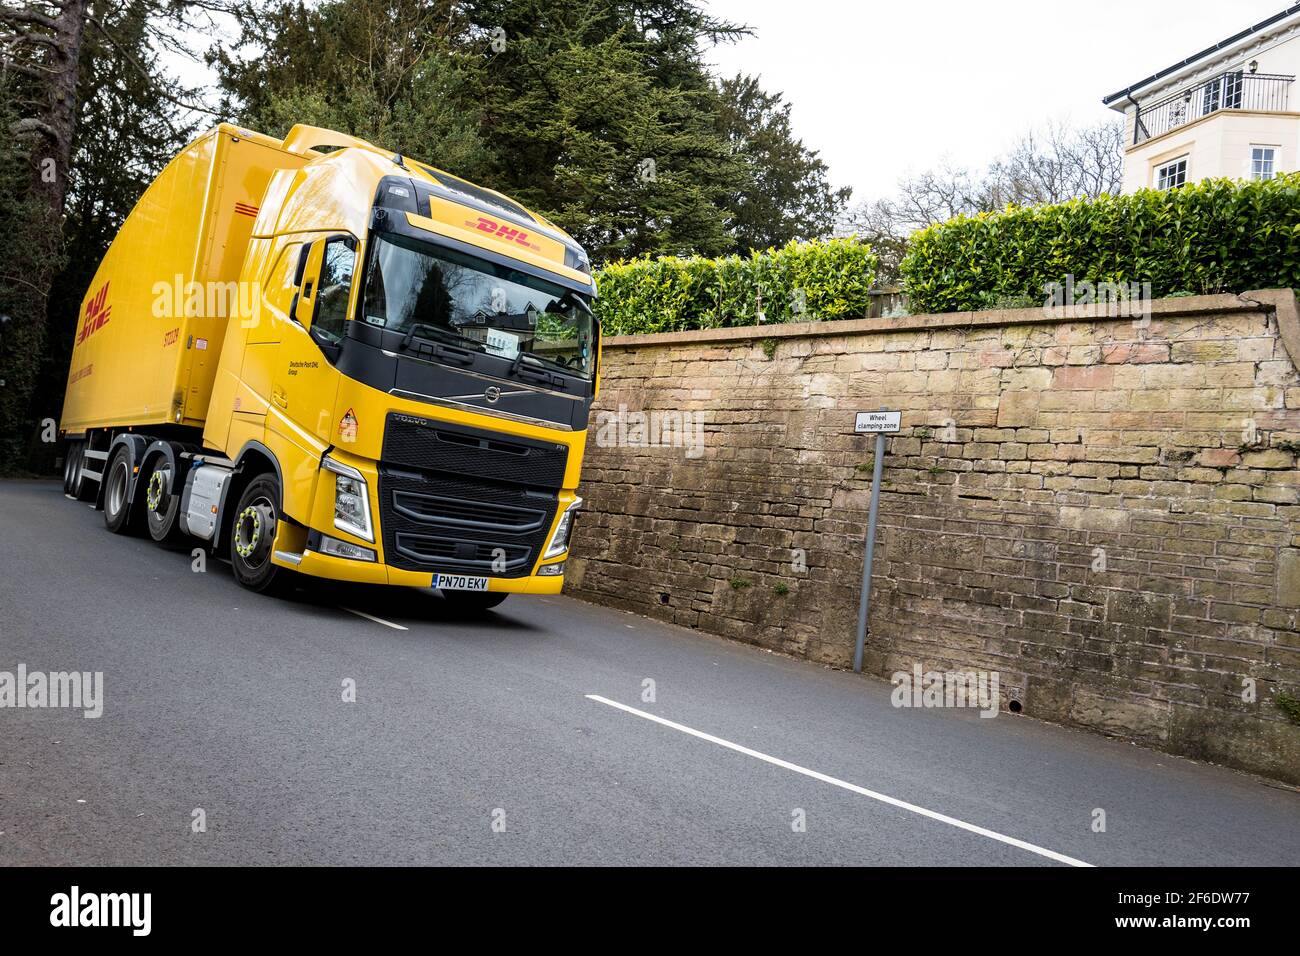 Volvo FH heavy truck in DHL livery colour yellow drives along a narrow country lane. Stock Photo